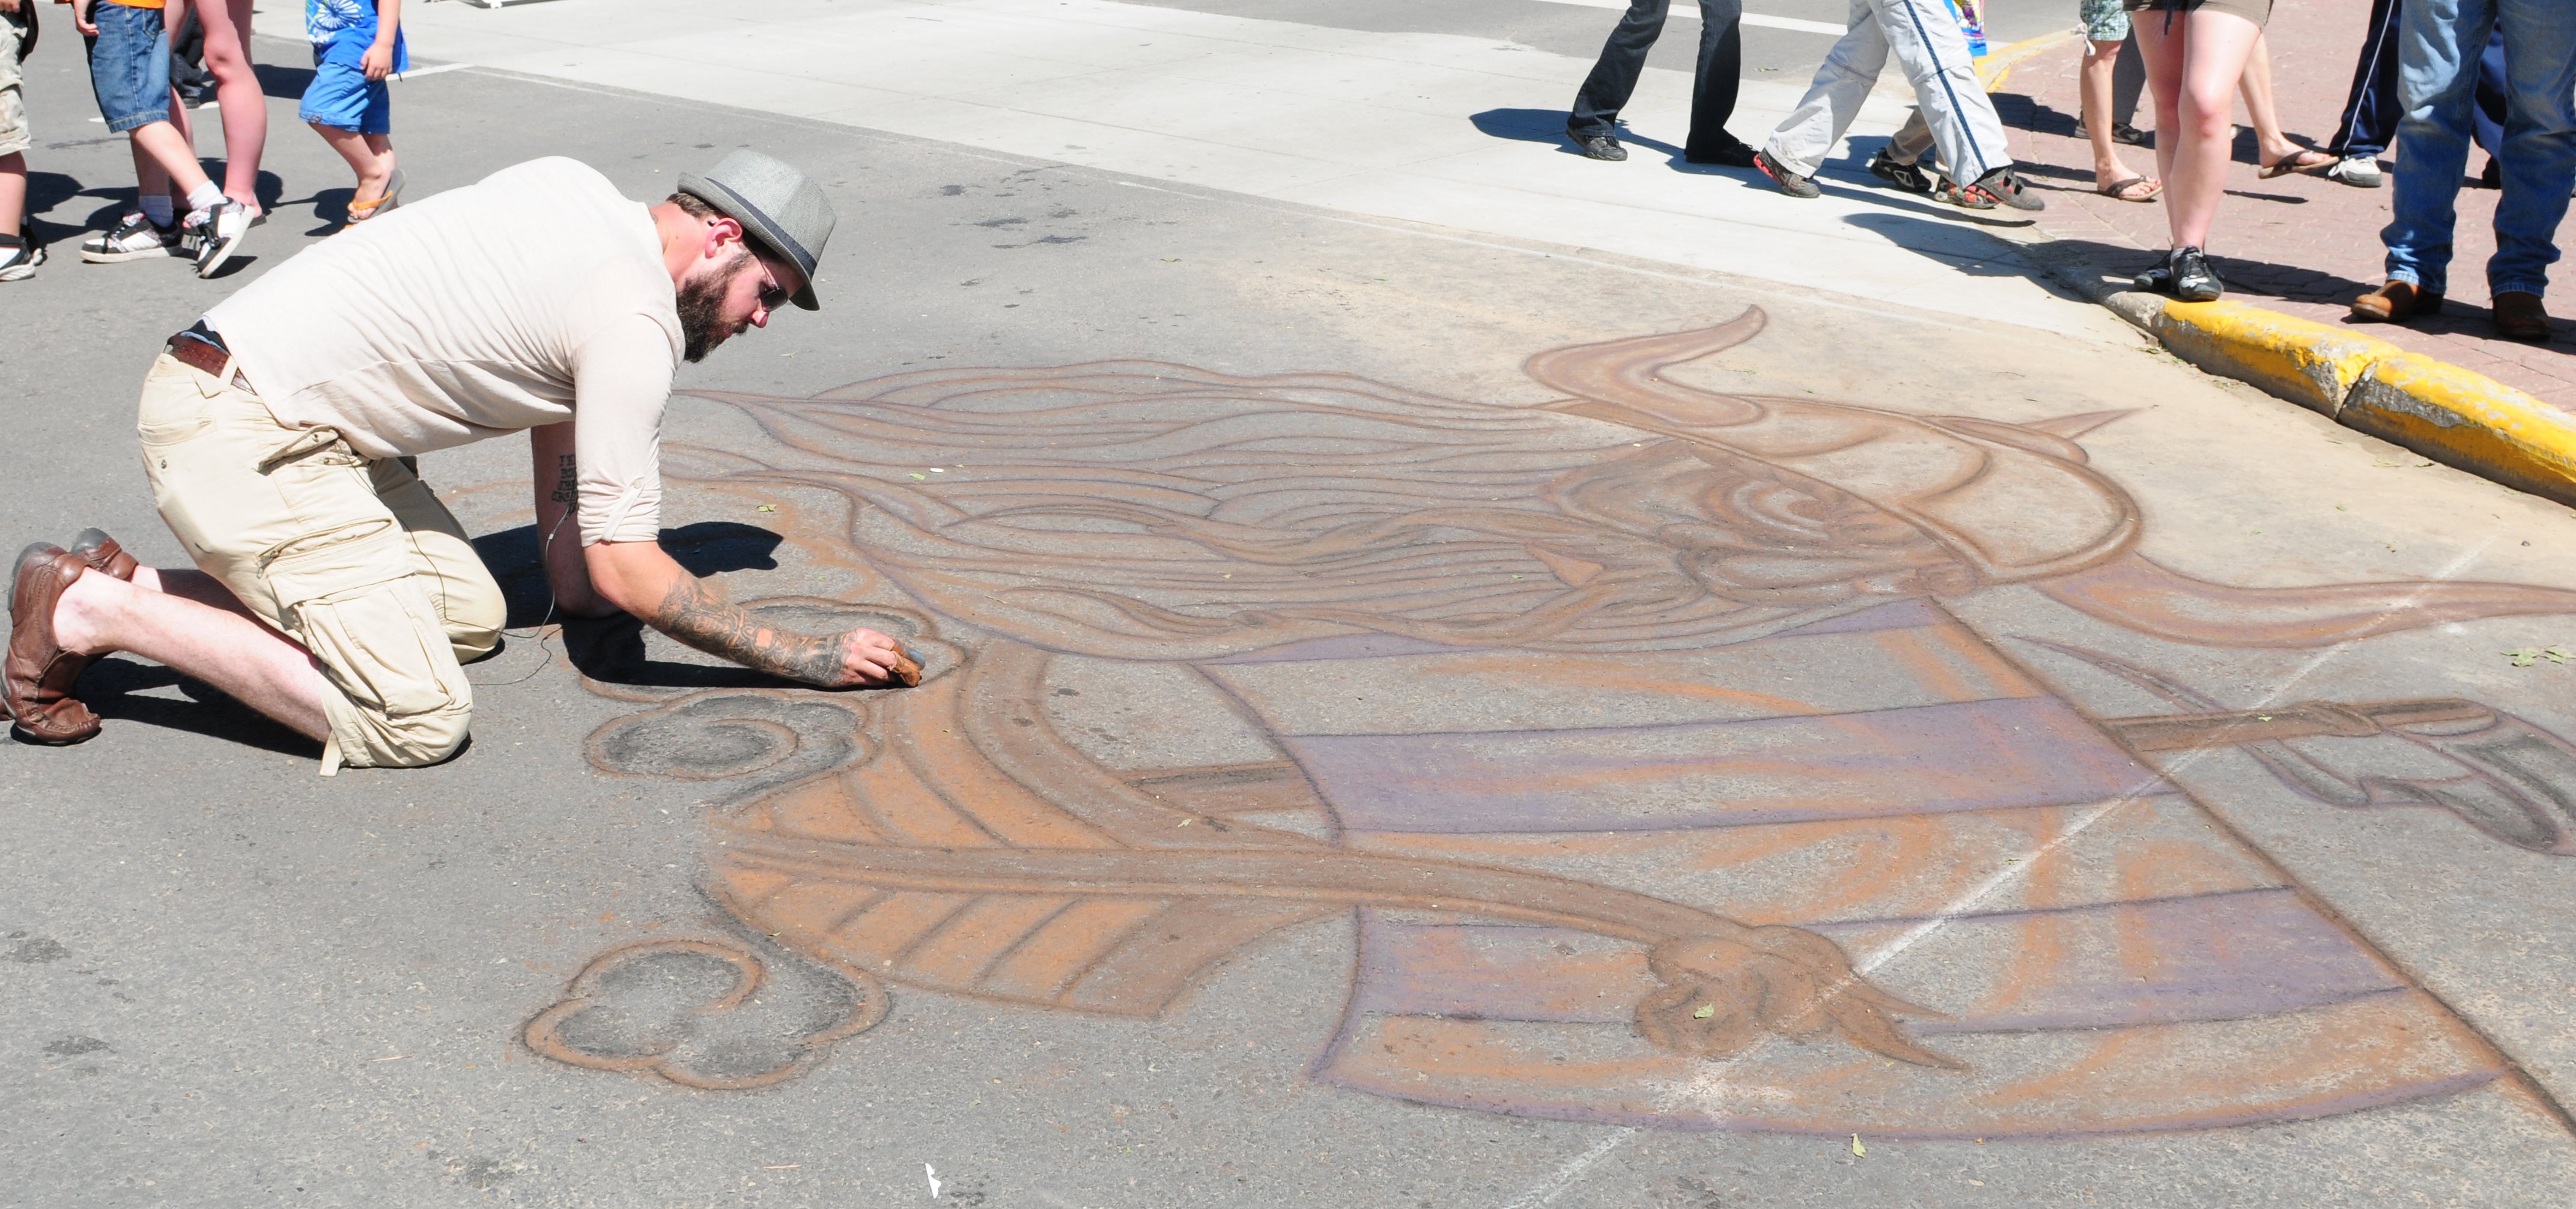 AMAZING ART- Artist Josh Christensen uses his fingers to chalk out a viking on the sidewalk during CentreFest this past weekend downtown.